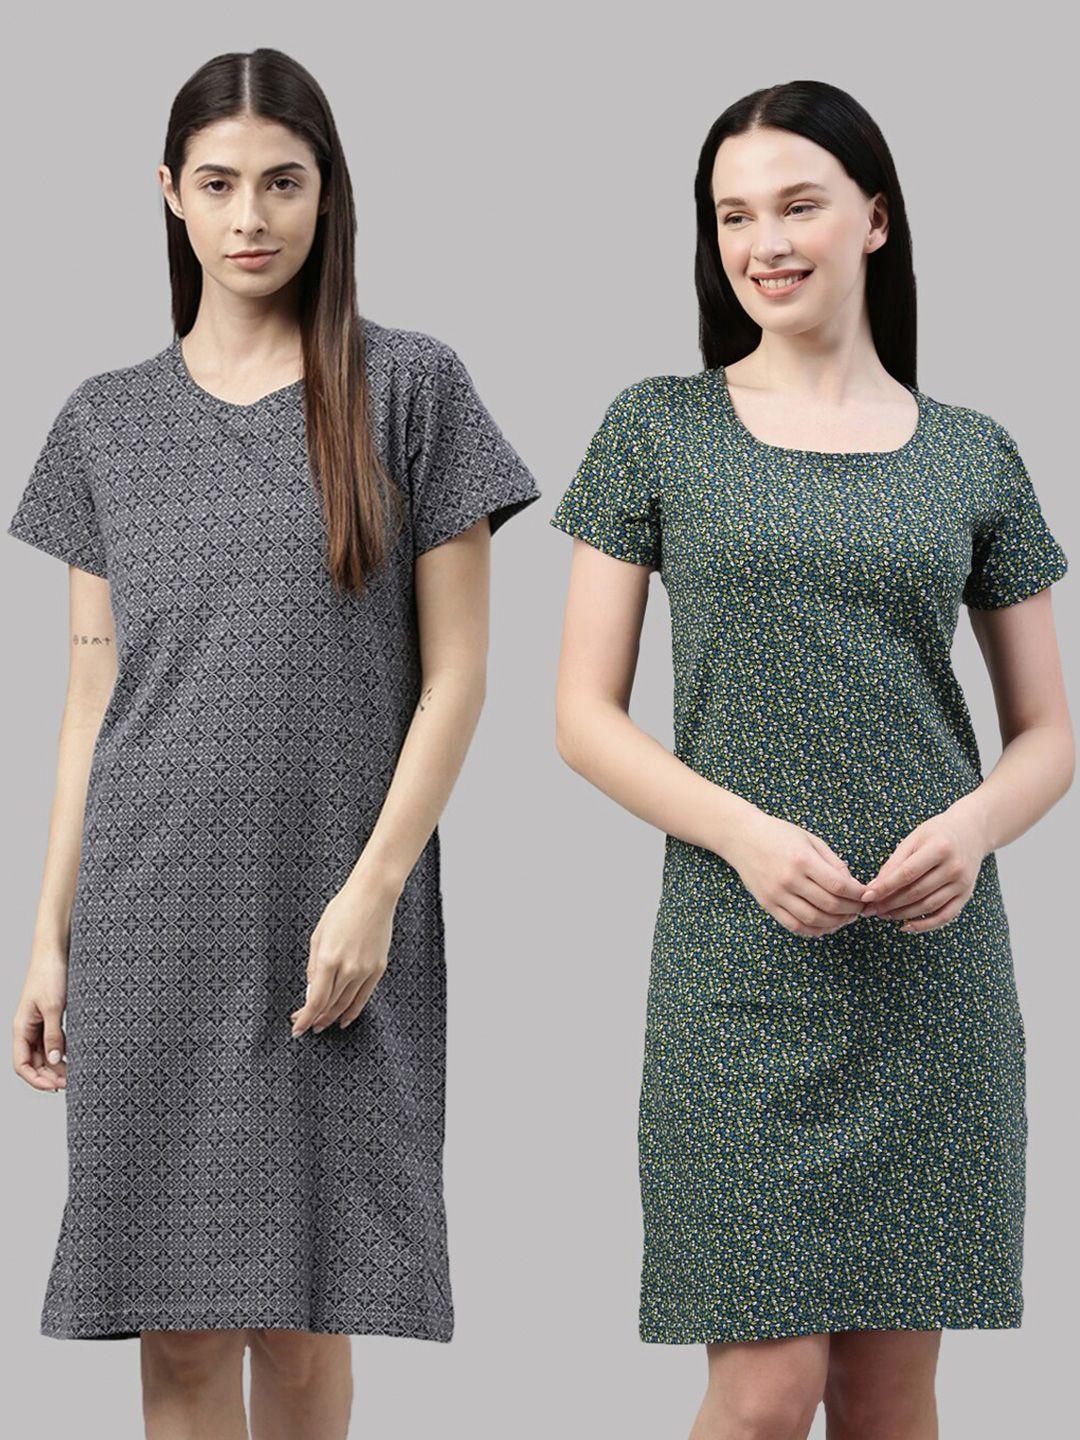 kryptic pack of 2 grey & green cotton printed nightdress